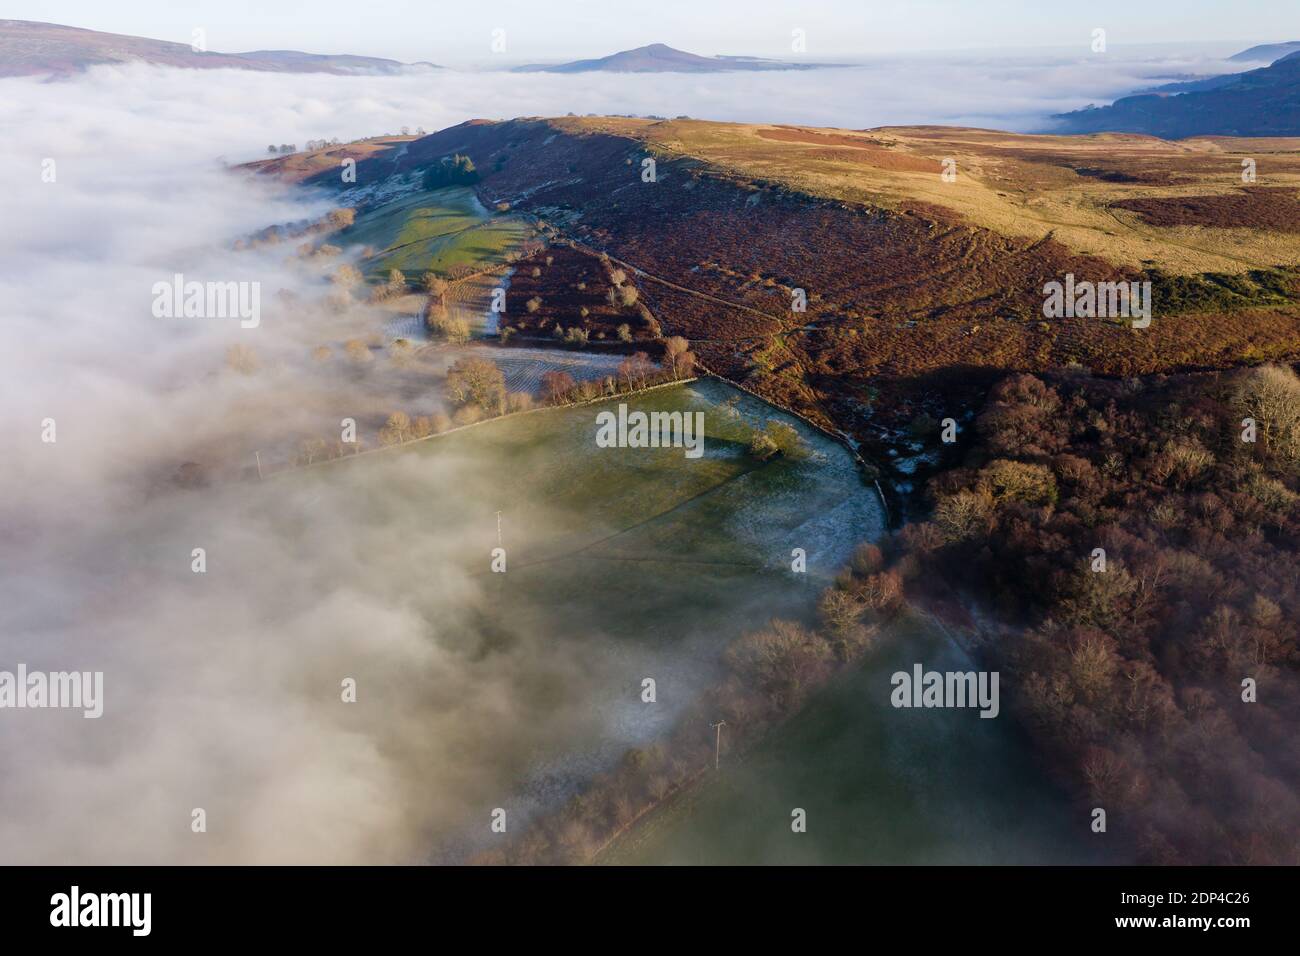 Aerial view looking down through fog on a frosty, frozen rural landscape (Wales, UK) Stock Photo